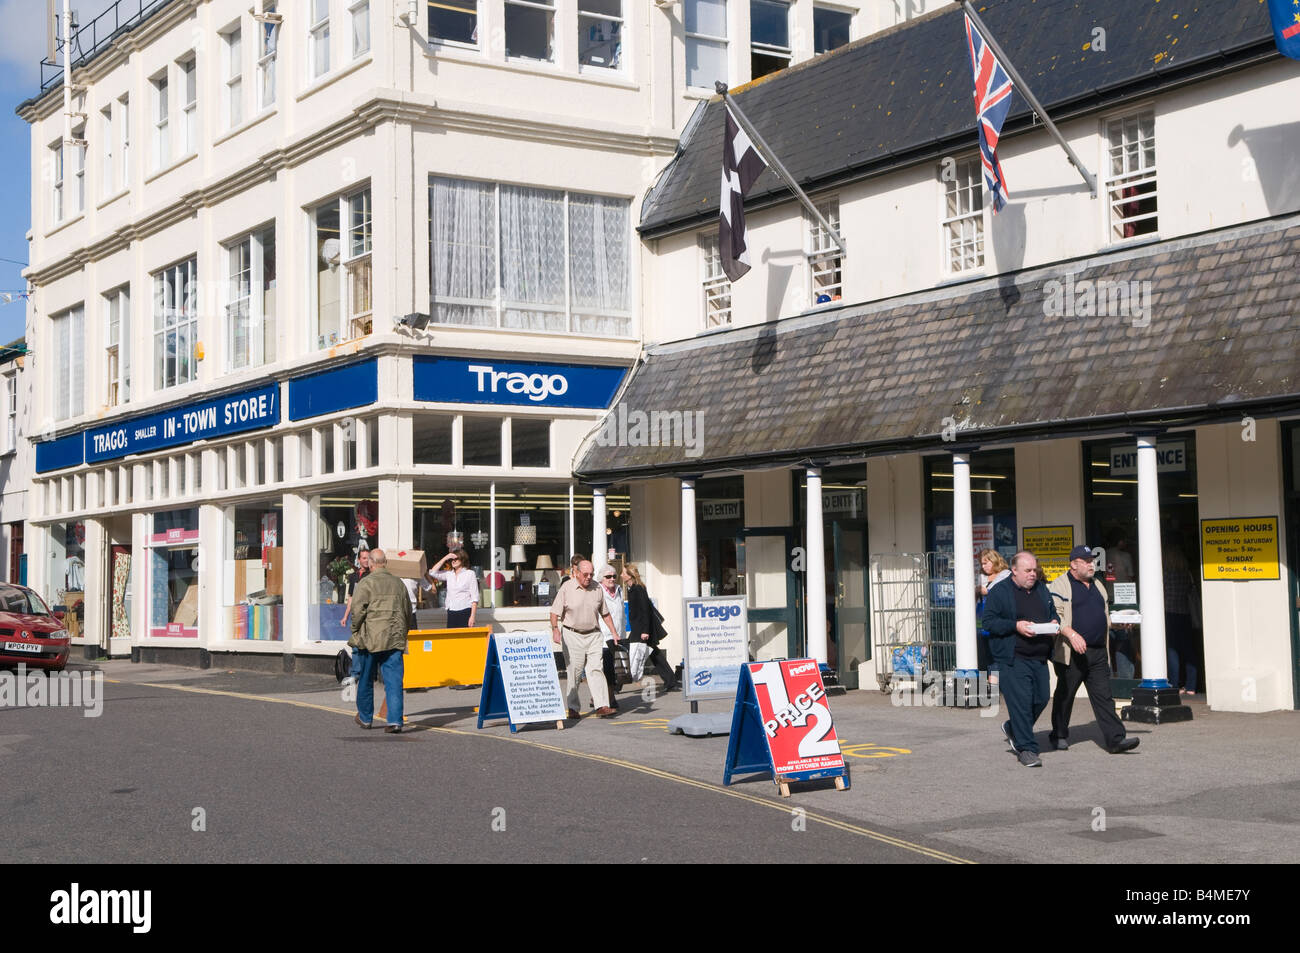 Falmouth, Cornwall, UK. Trago Mills Superstore Stock Photo